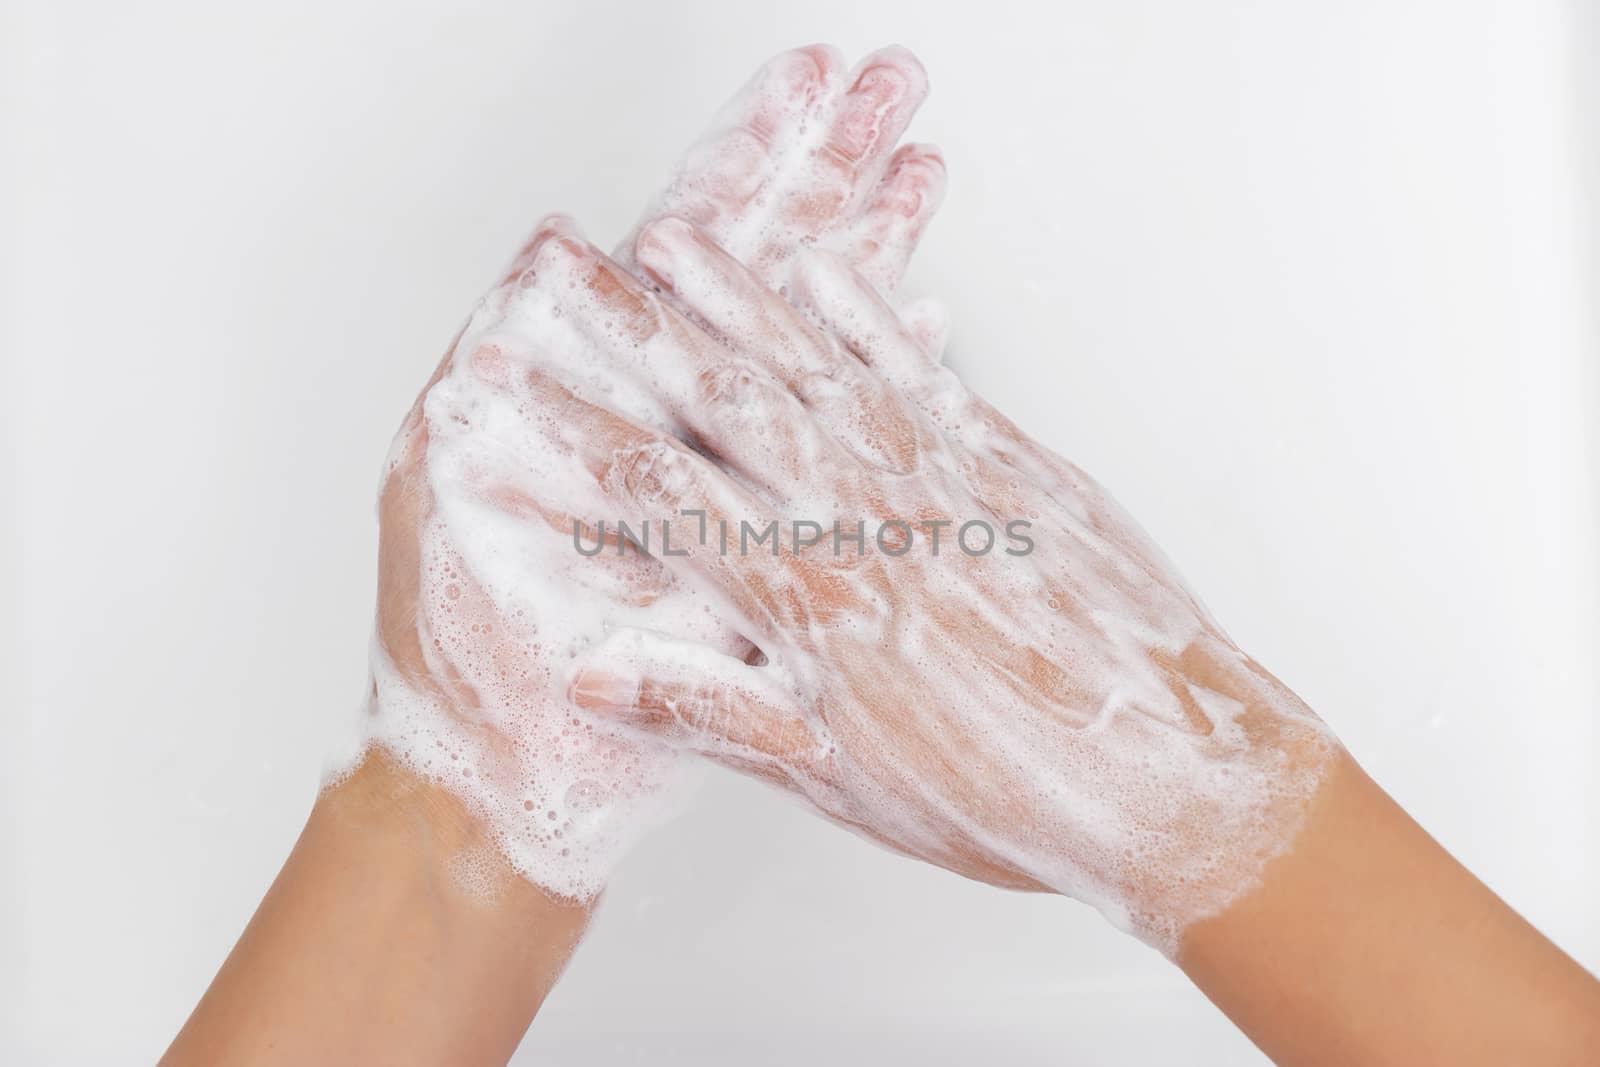 personal hygiene. washing hands, rubbing hand thoroughly with soap that has a lot of bubbles for cleaning and disinfection, prevention of spreading of germs during infections of COVID-19 Coronavirus